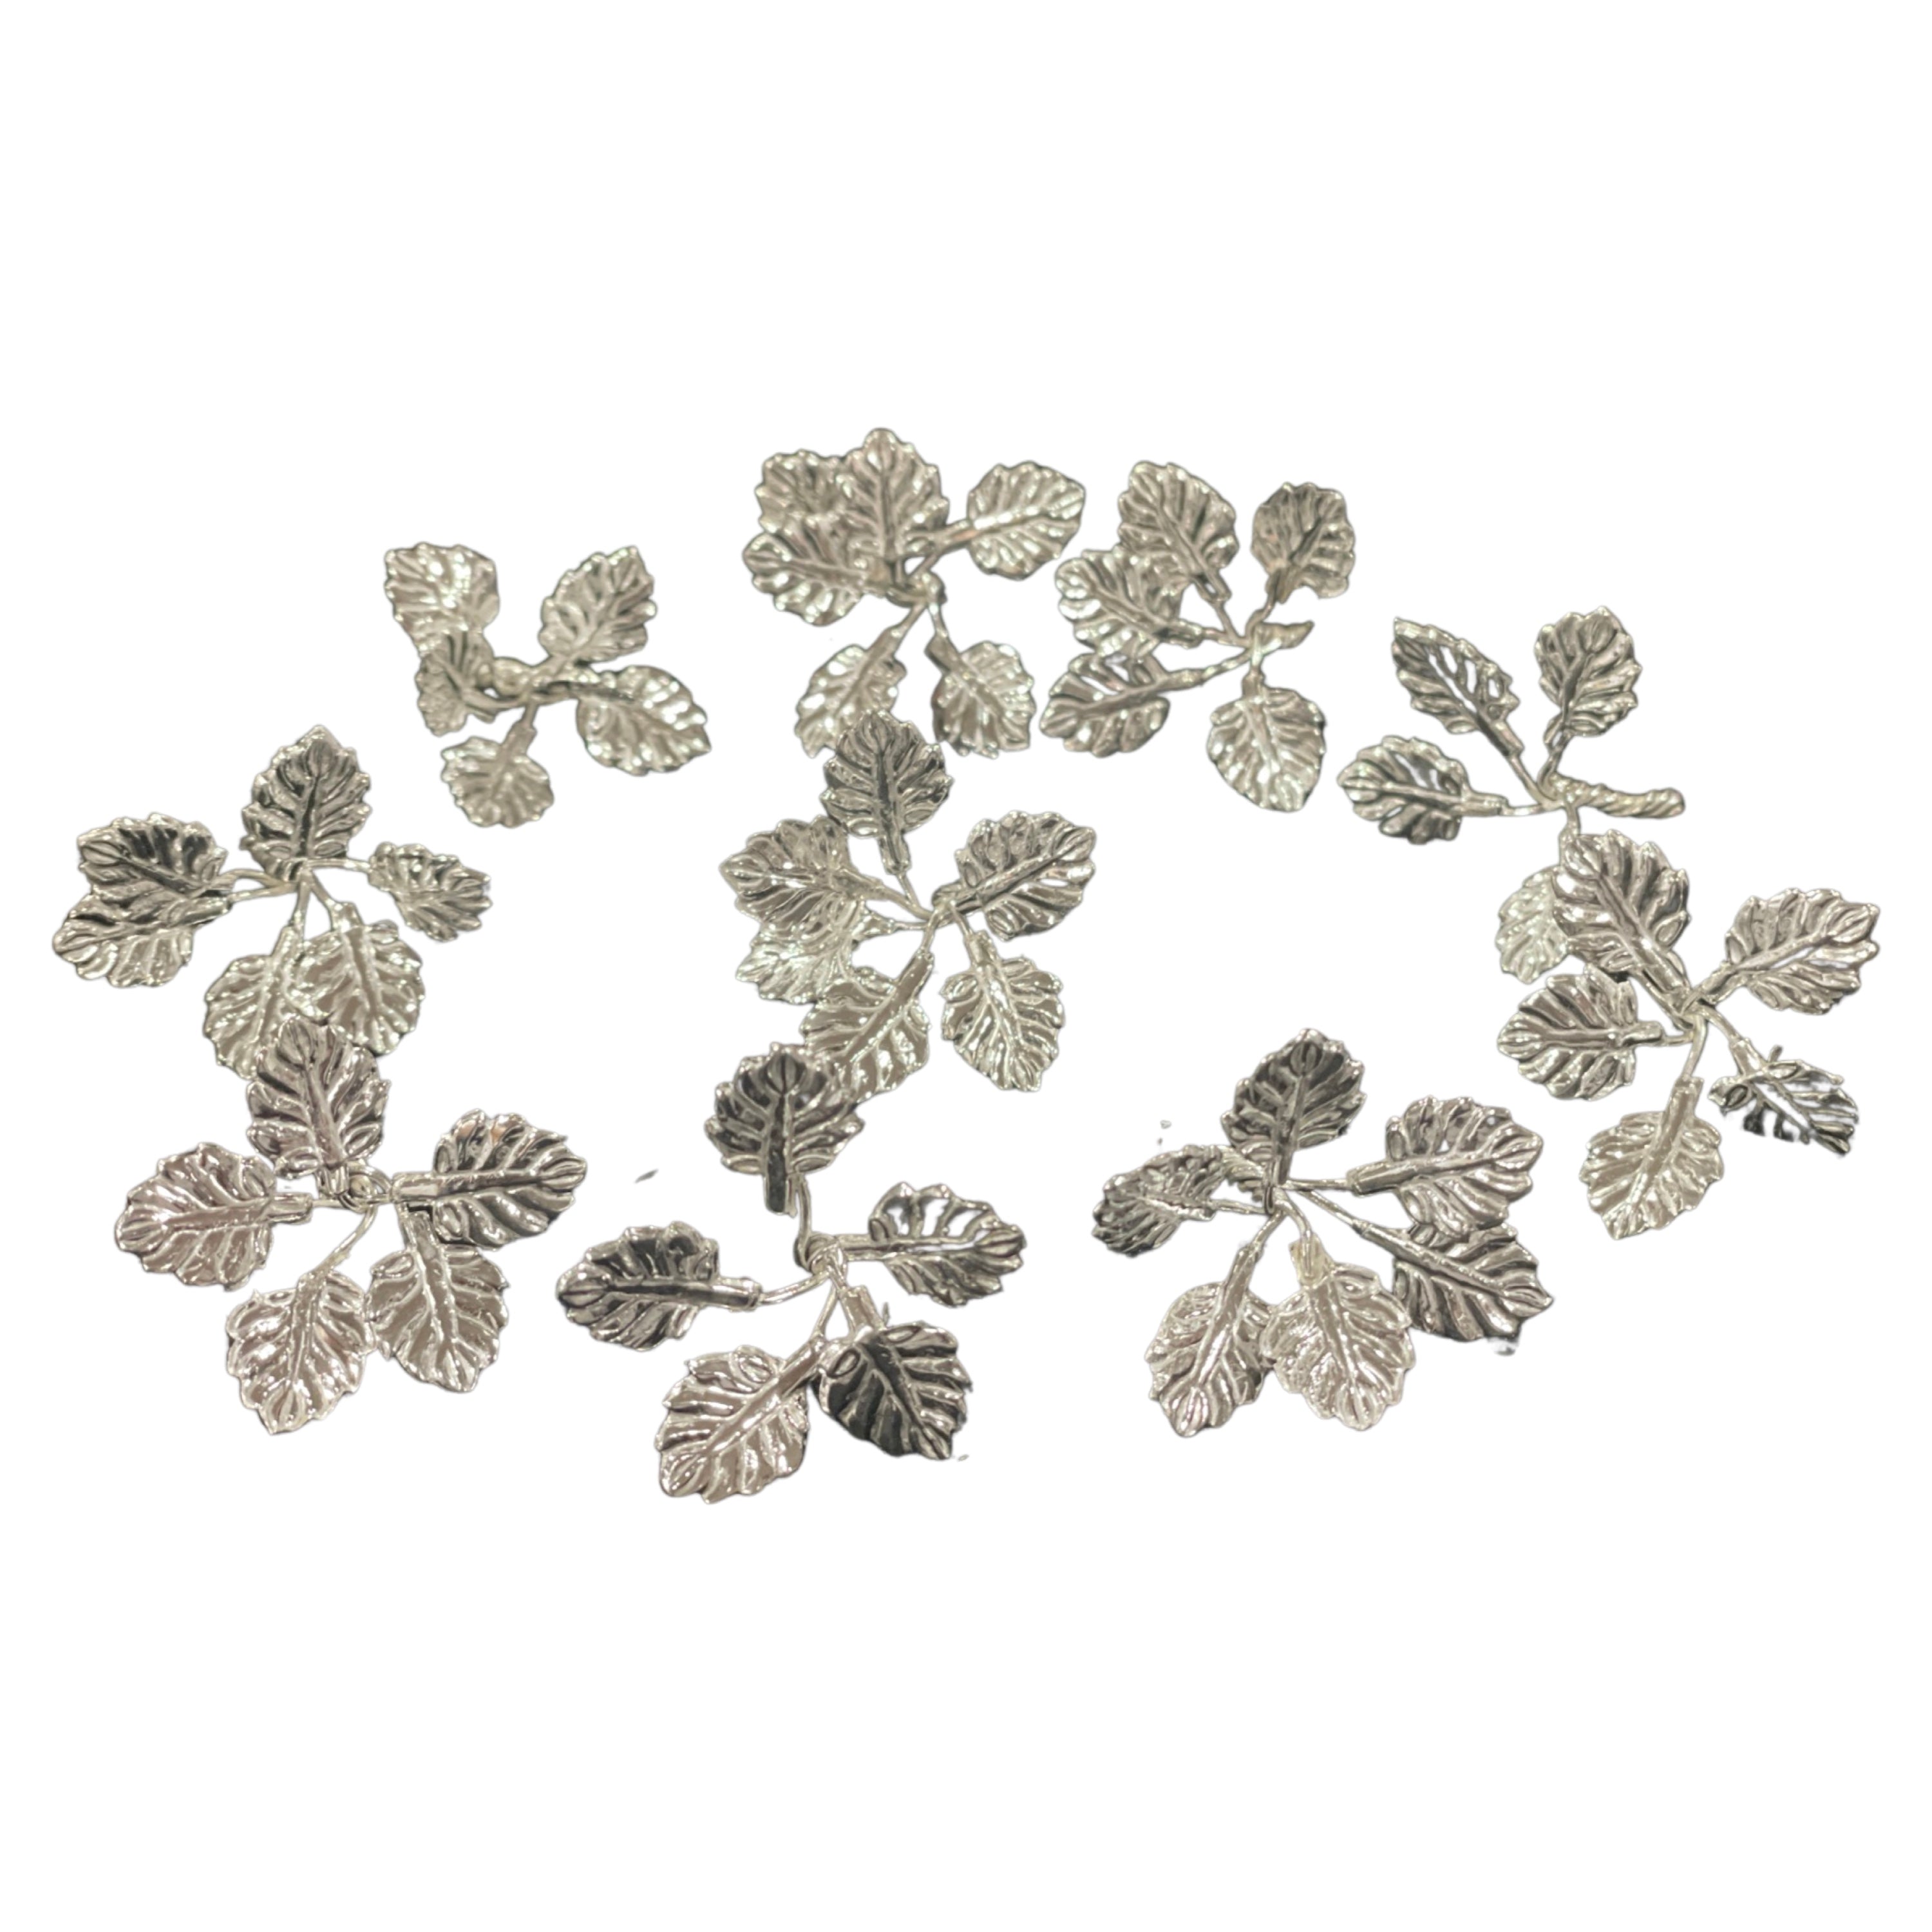 750 Silver Religious Tulsi / Basil Leaves (Set of 10 branches) Set - Style#03